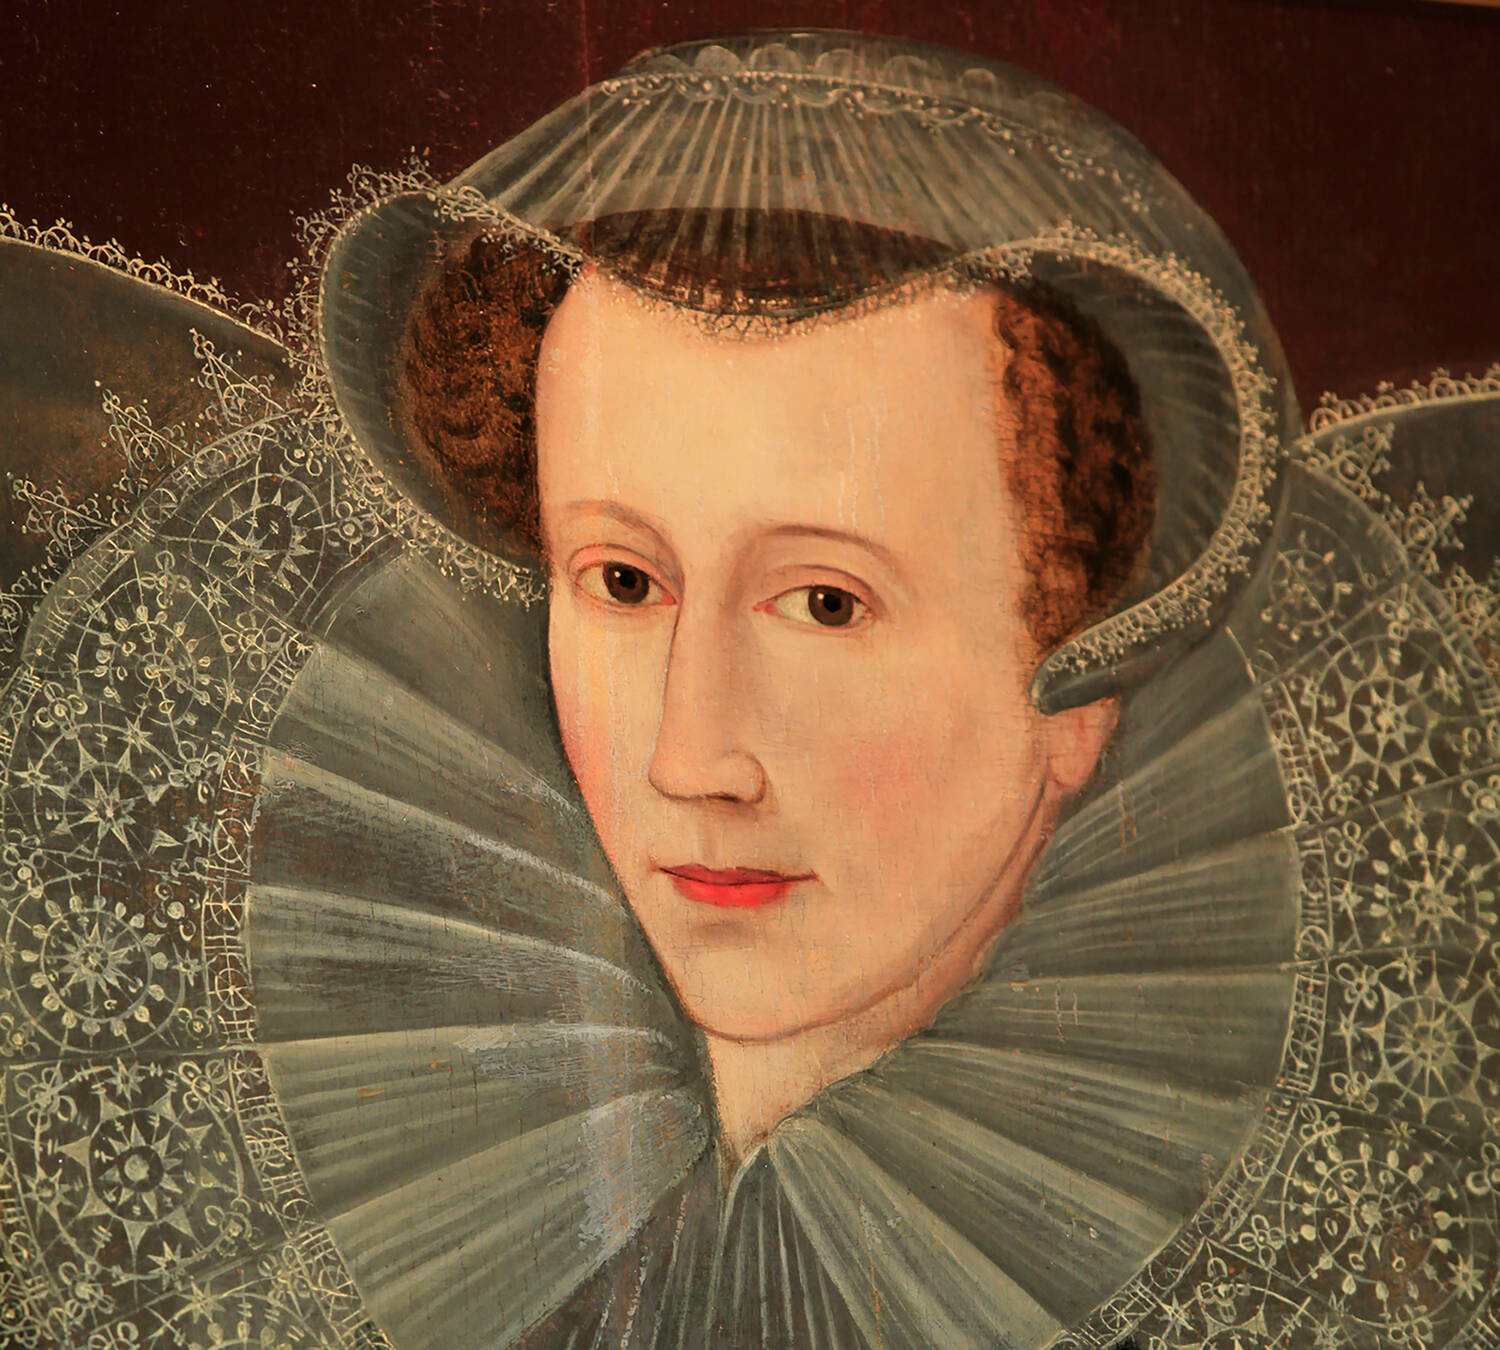 Posthumous portrait of Mary, Queen of Scots